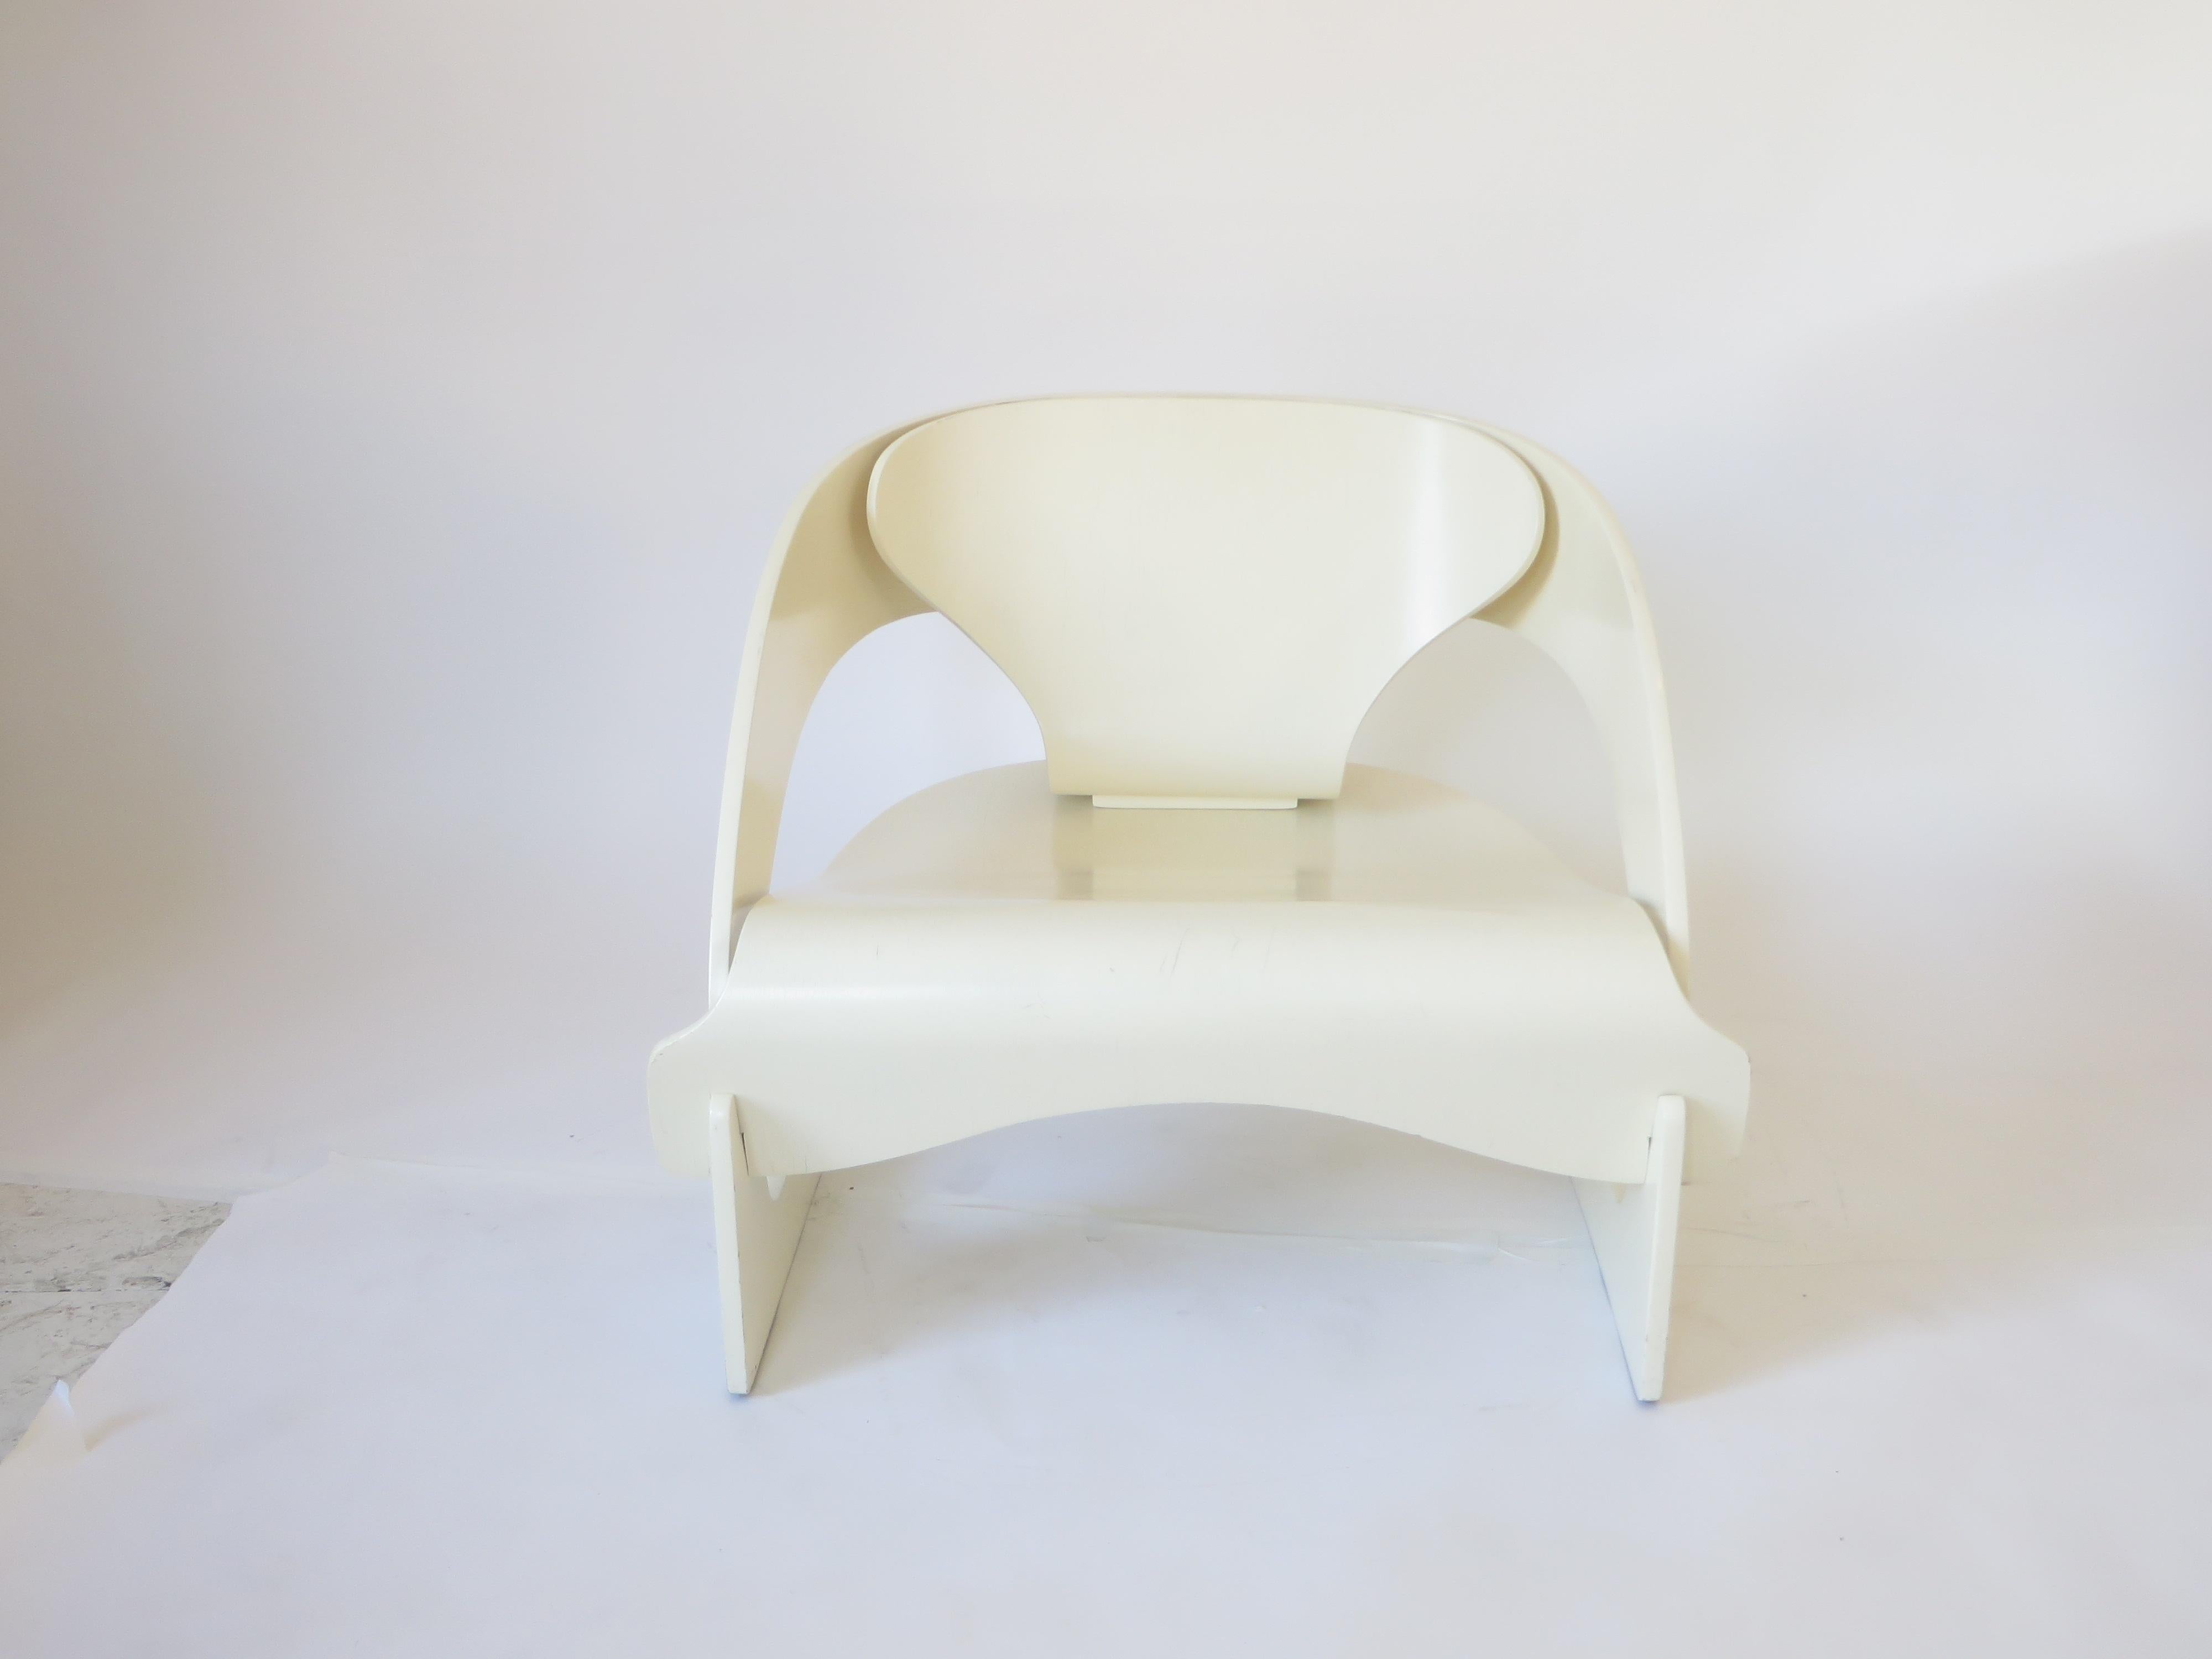 Joe Colombo designed the Model 4801 chair from three curved pieces bent beech plywood. Colombo’s innovative idea was to design a lounge chair that could simply slot togehter with no screws or fasteners of any kind. The weight of the sitter then